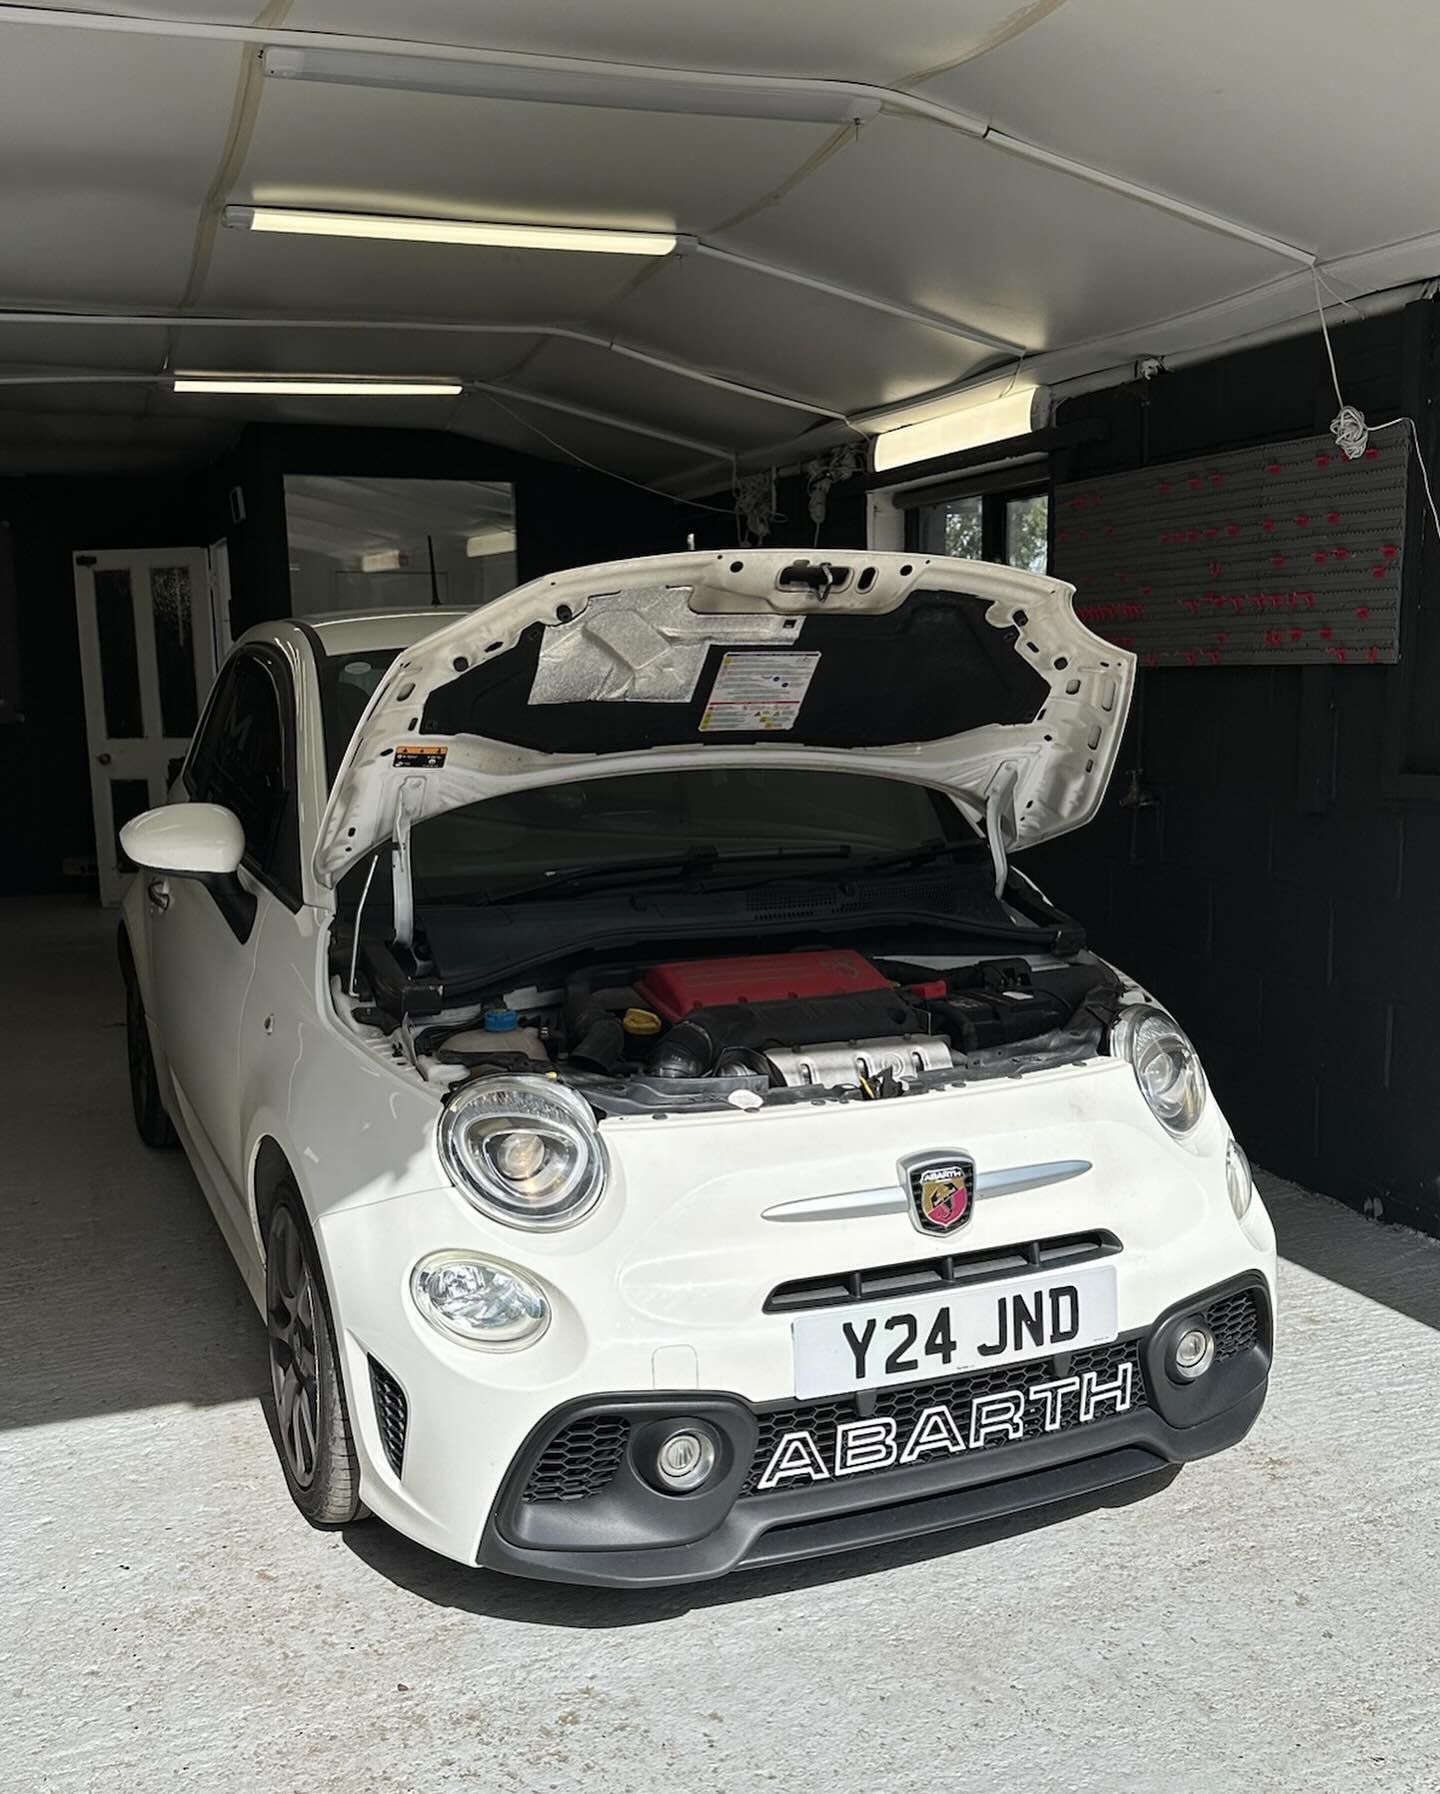 Incredible Fiat Abarth in the workshop looking for some big power gains 🔥 

Own a Fiat and looking for more power? Get in contact to find out what we can do for you ☑️

➖➖➖➖➖➖➖➖➖➖➖➖➖

📱01707502665
📧 info@mac-tuning.co.uk
💻 www.mac-tuning.co.uk
📈